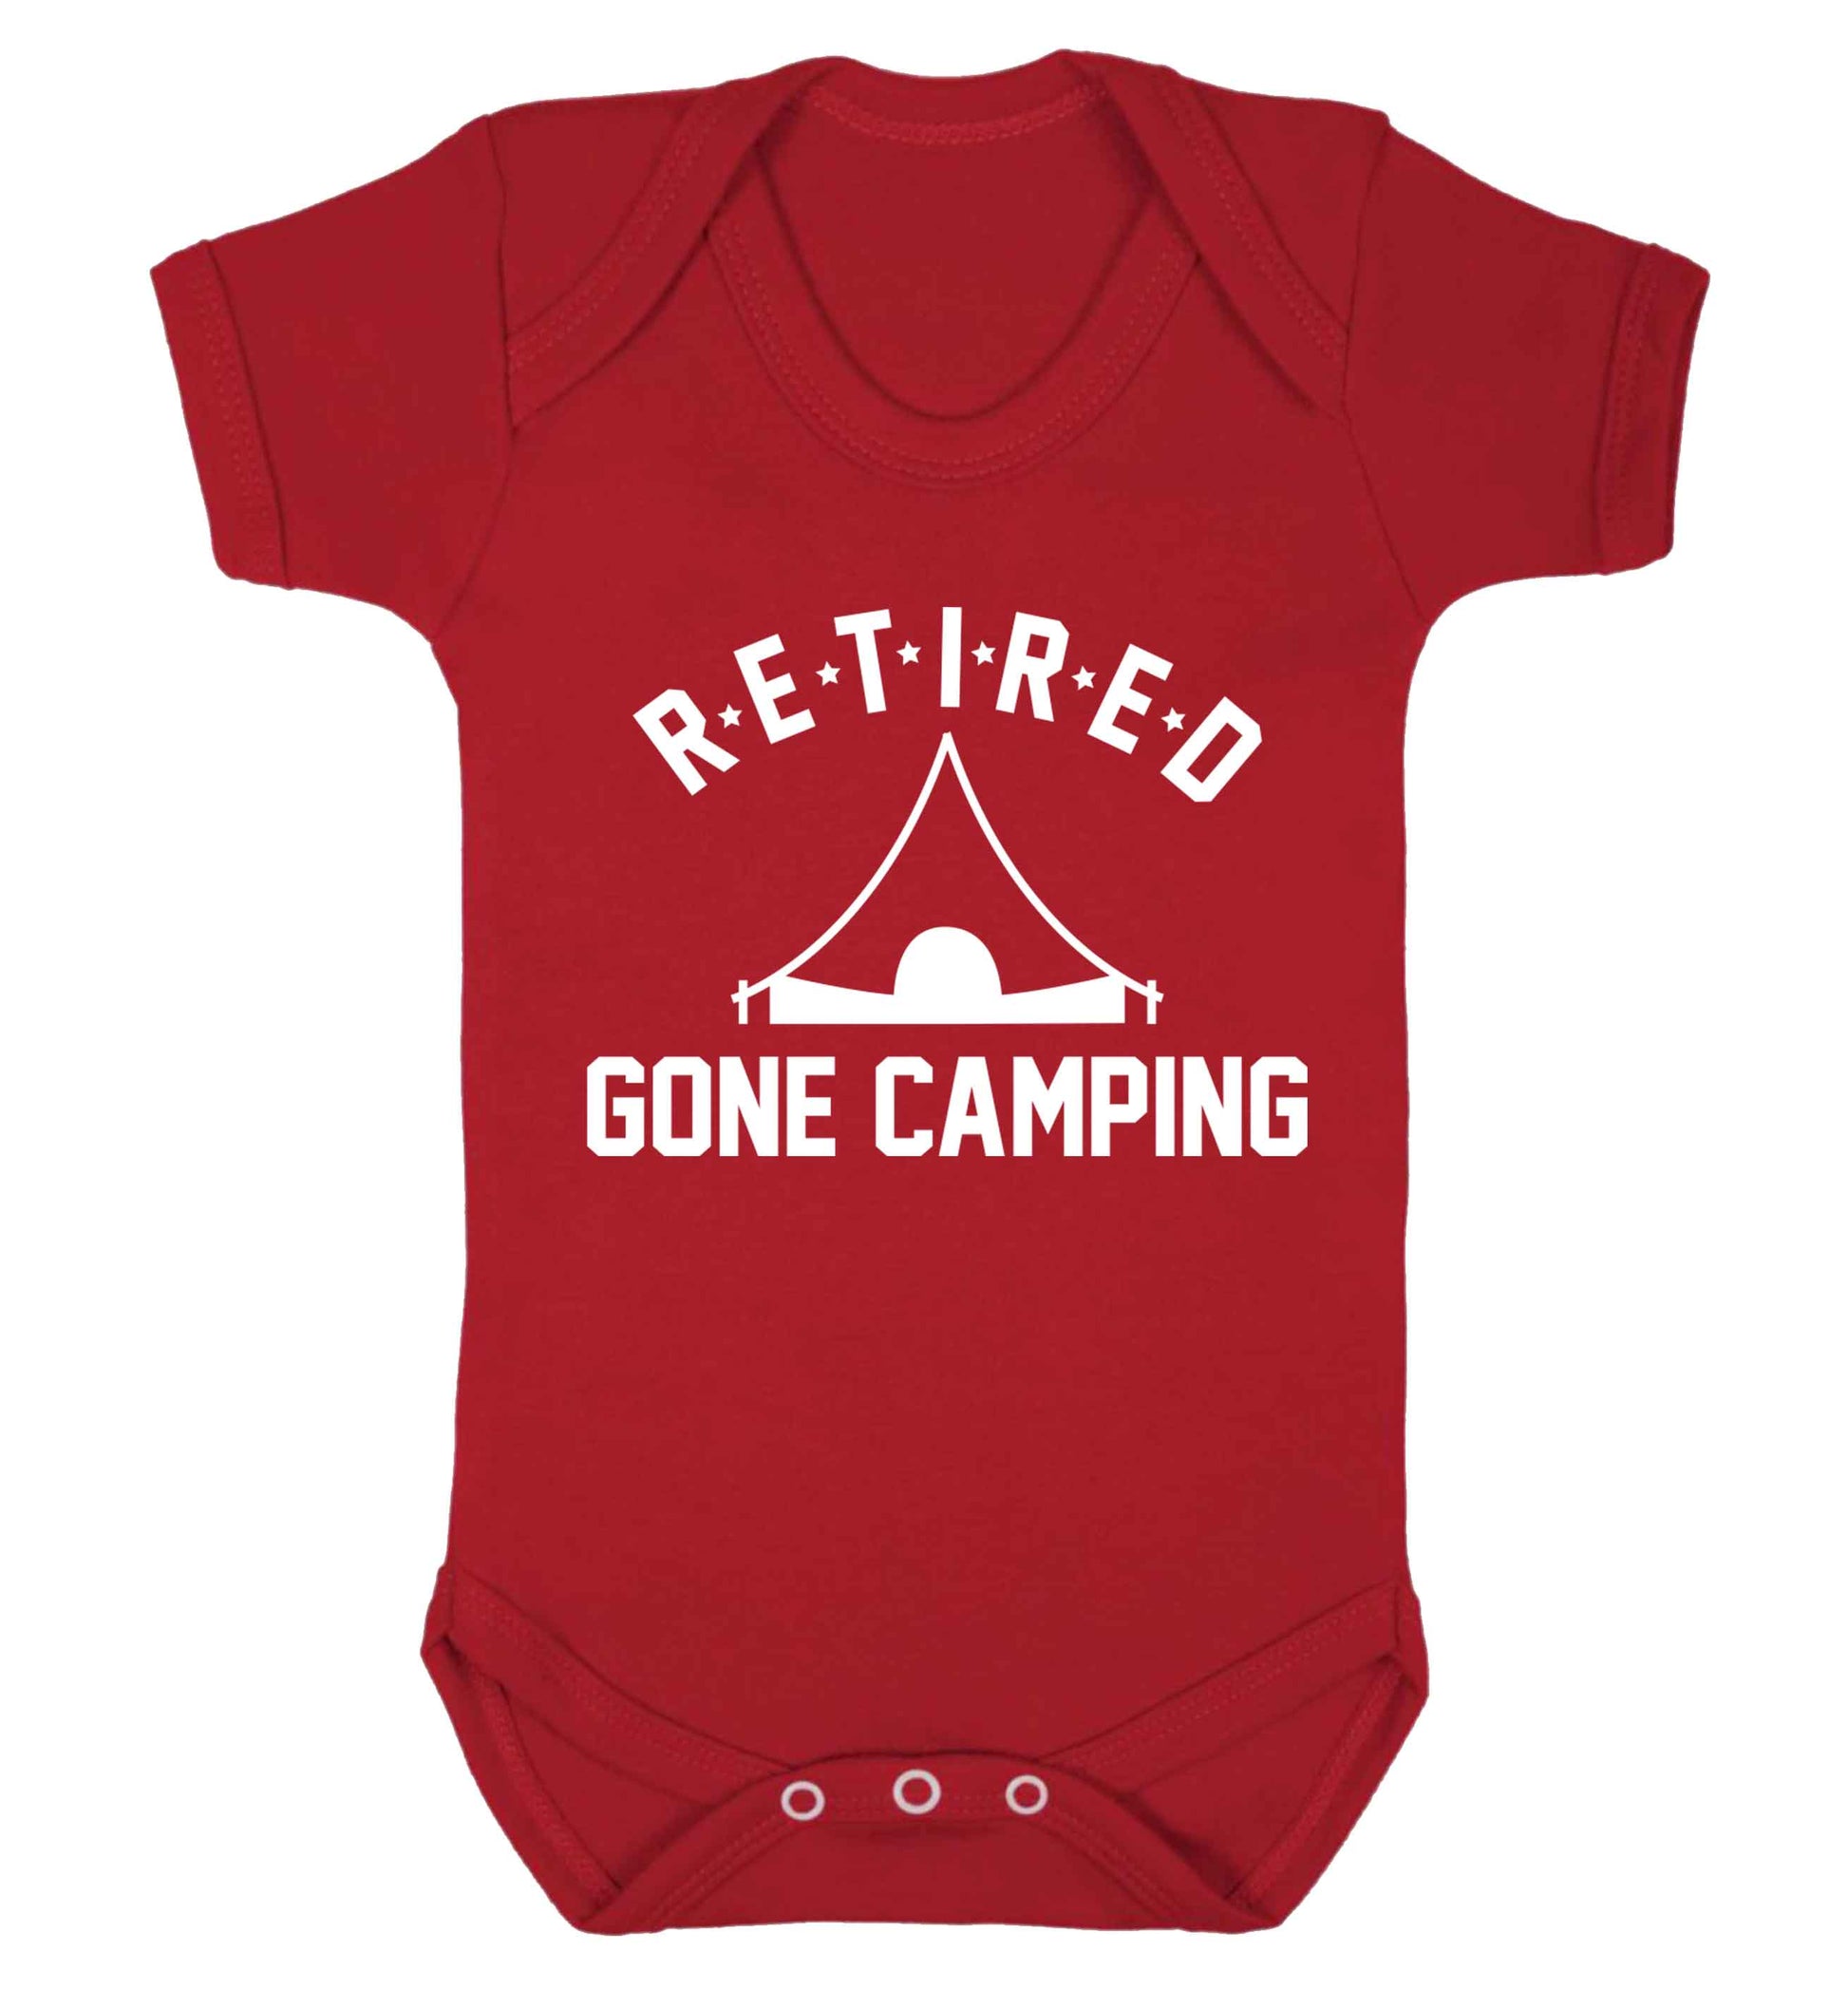 Retired gone camping Baby Vest red 18-24 months